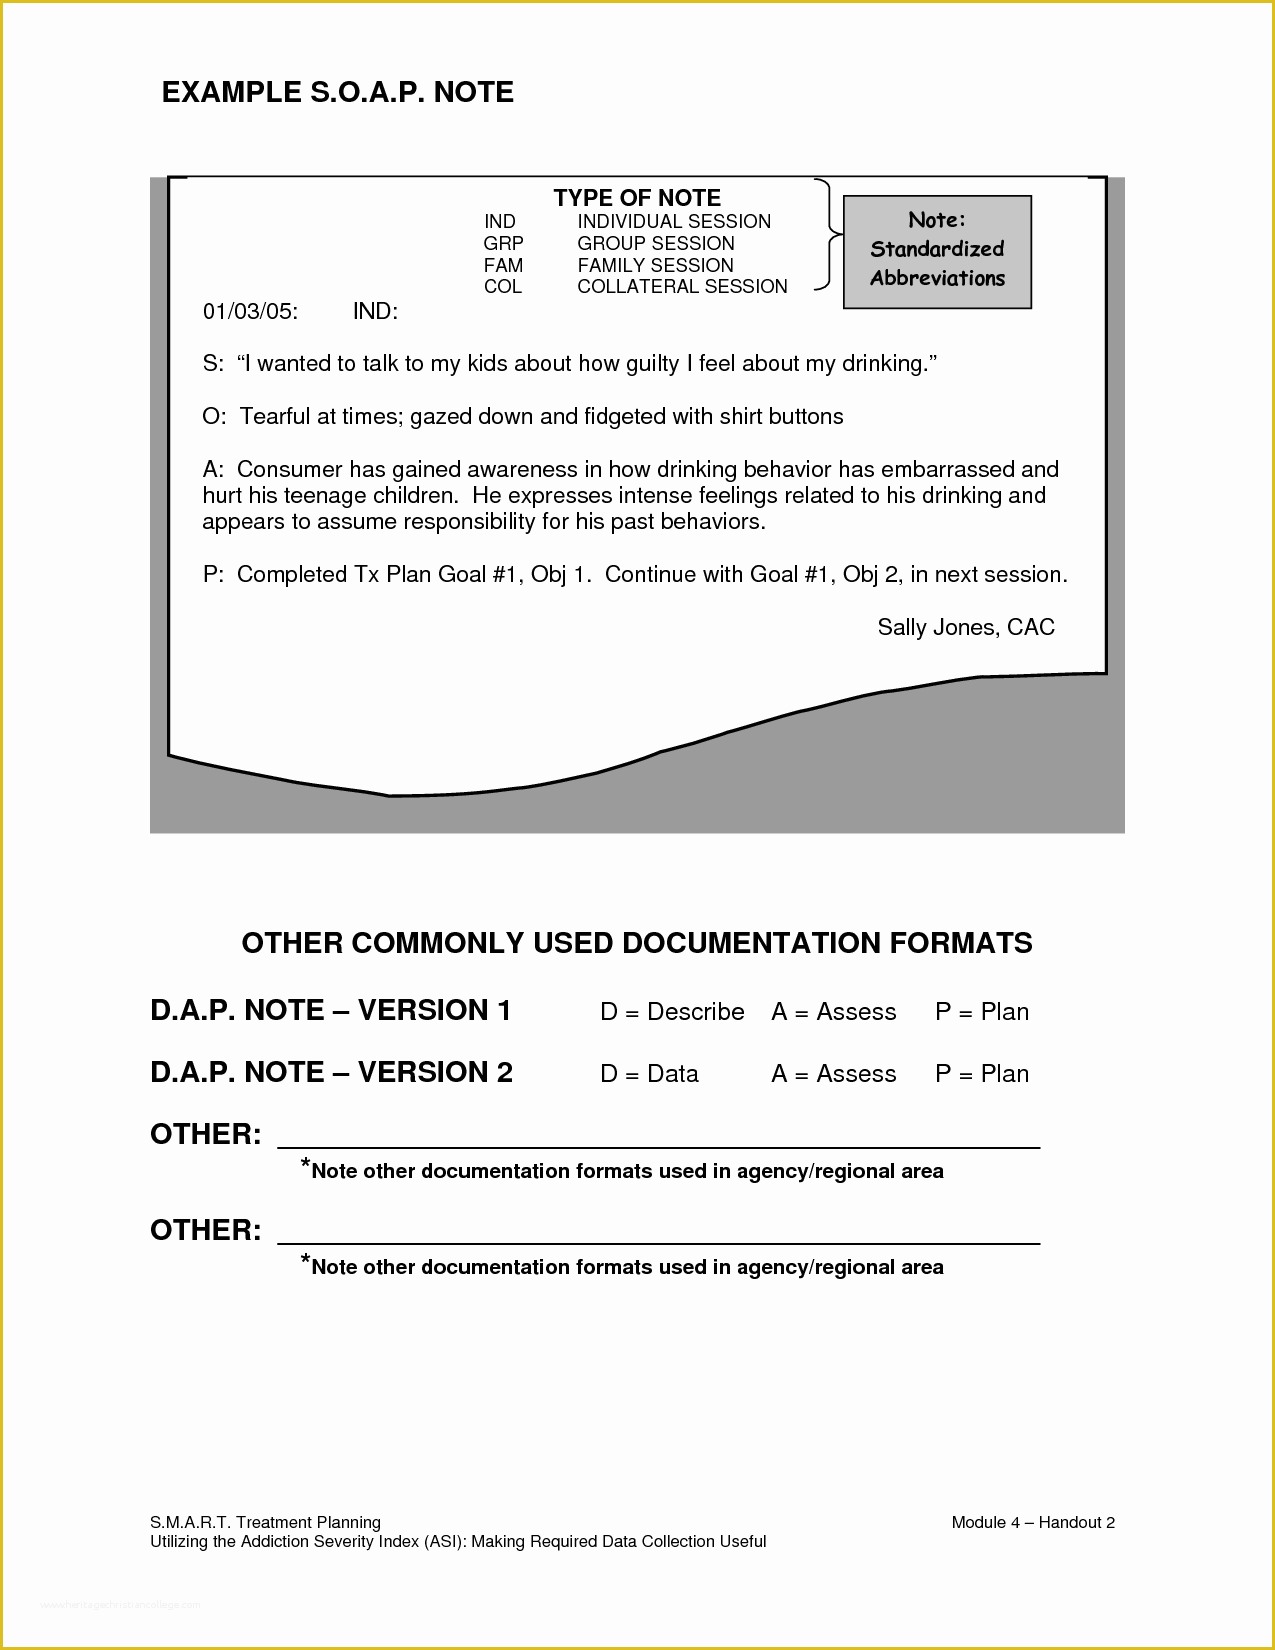 Free Dap Note Template Of Counseling soap Note Example …